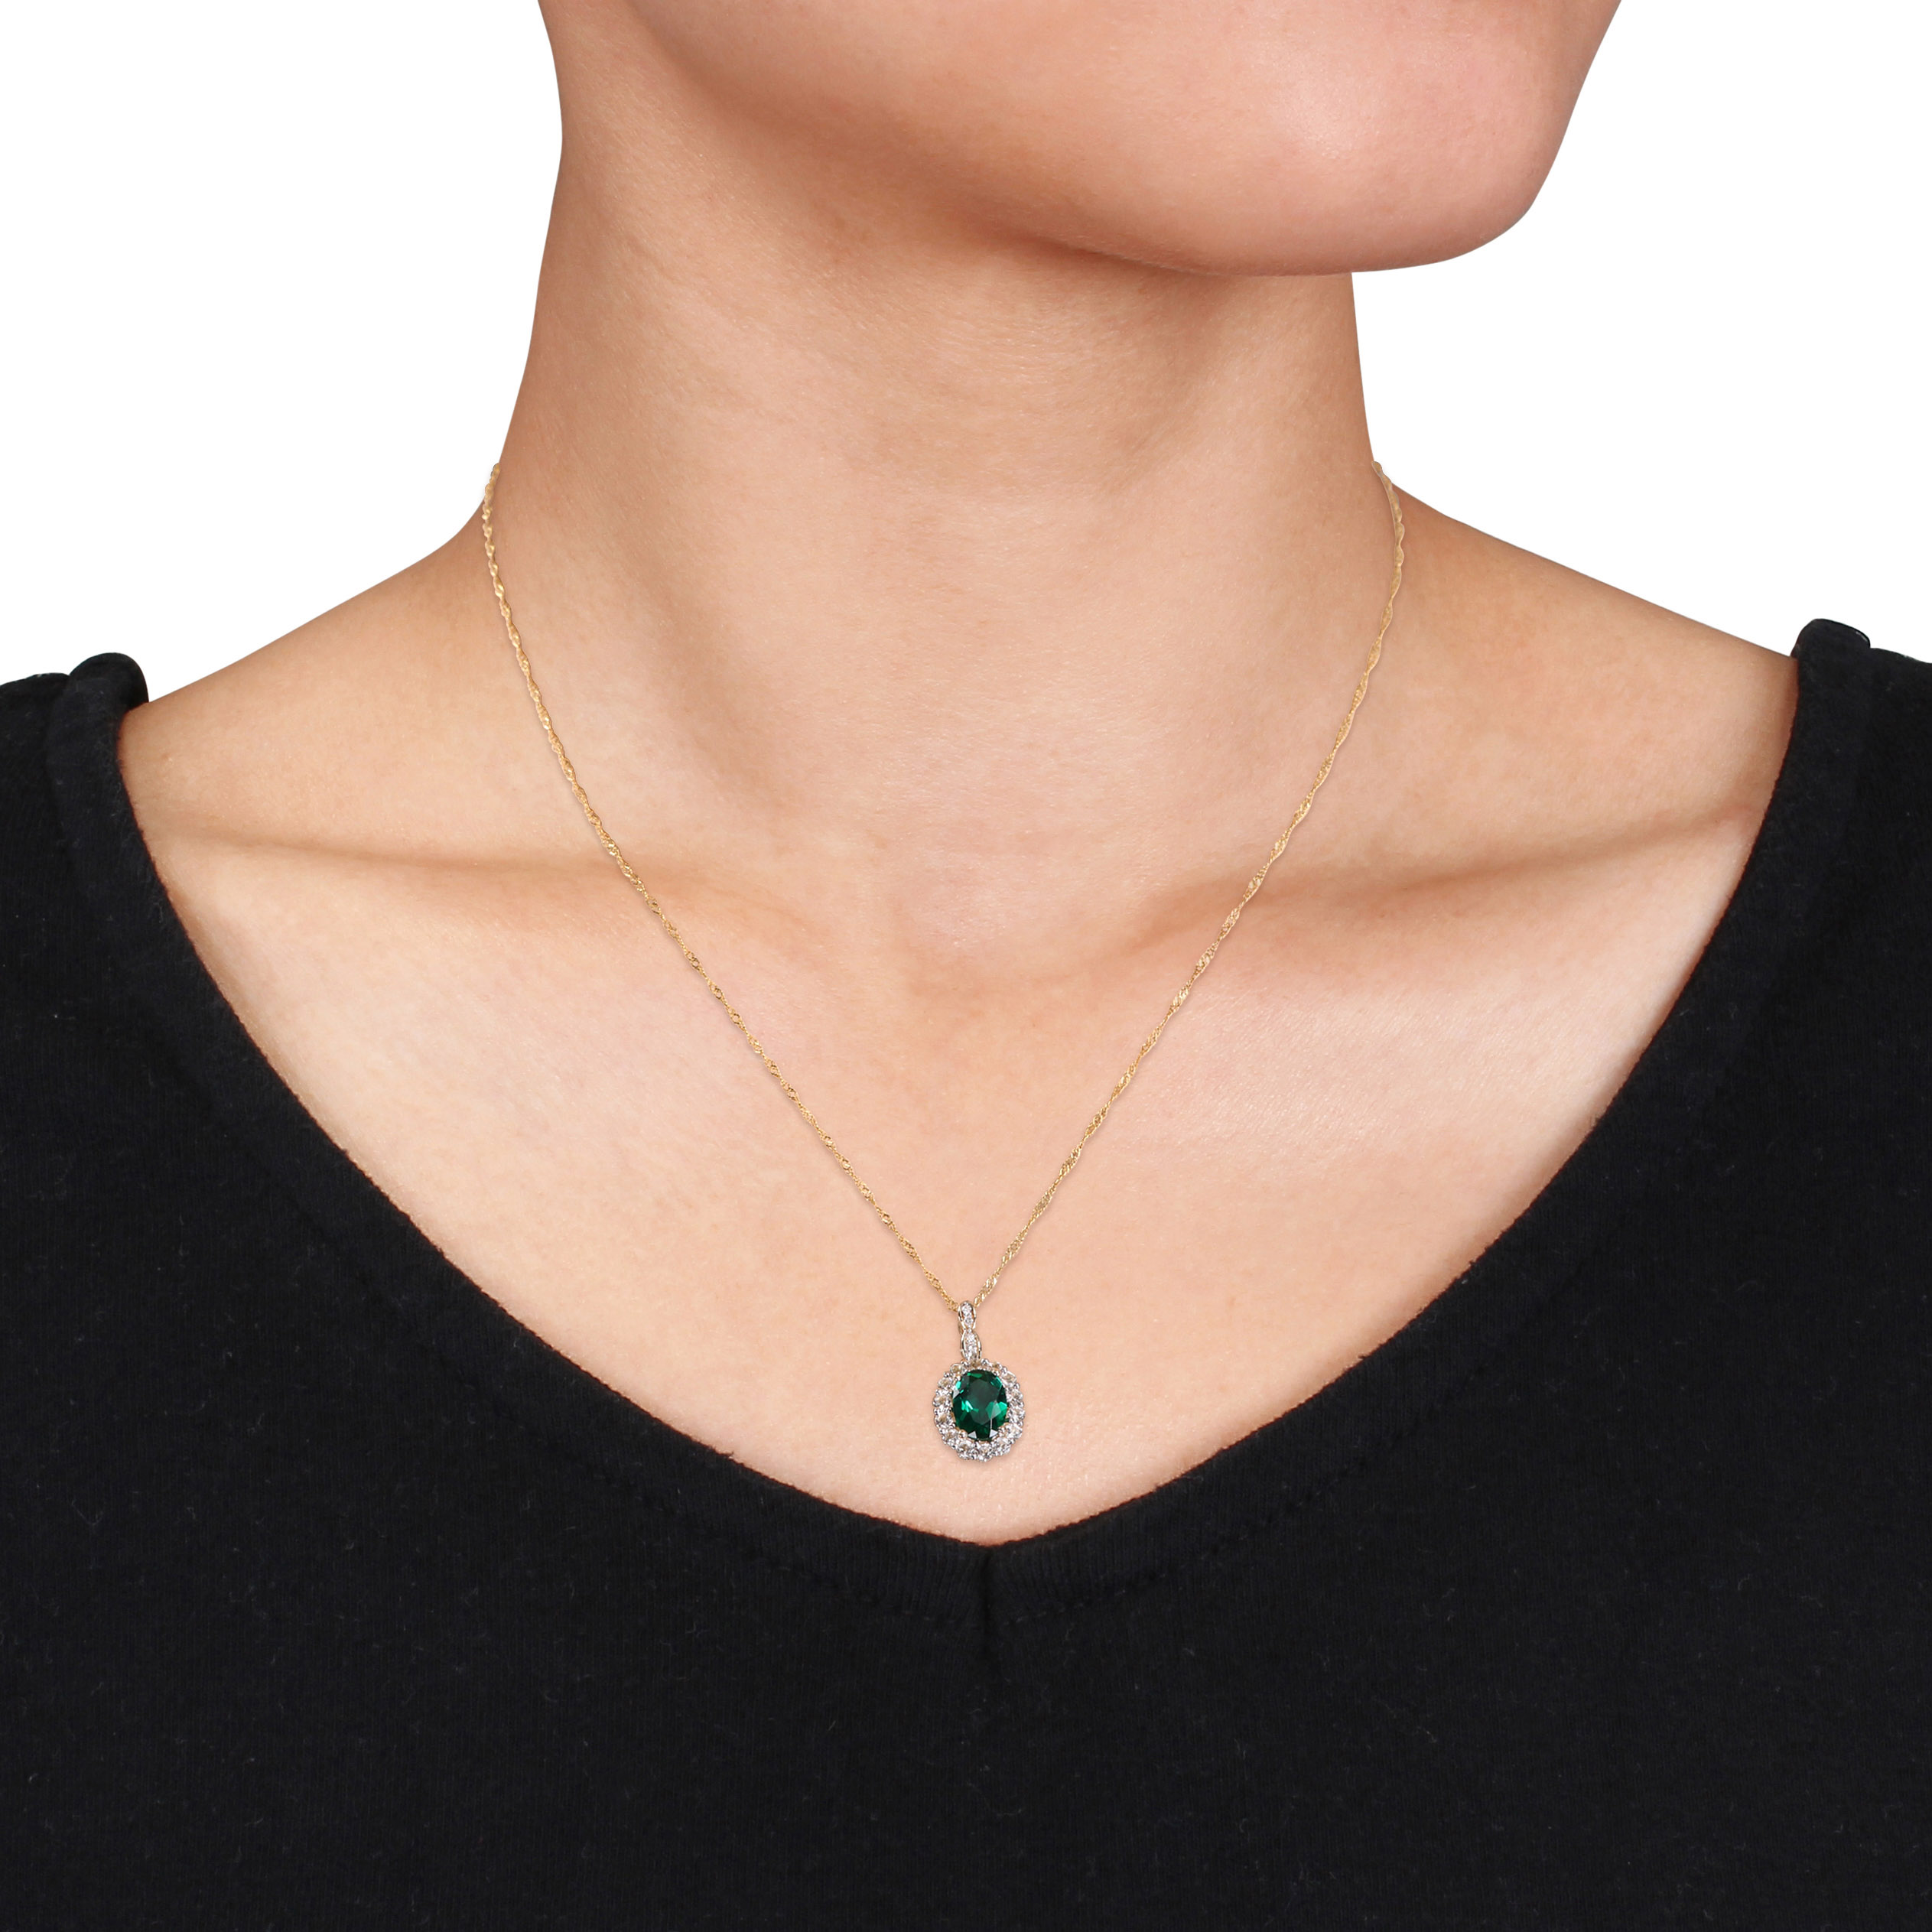 Oval Shape Created Emerald, White Topaz, and Diamond Accent Vintage Pendant with Chain in 14k Yellow Gold